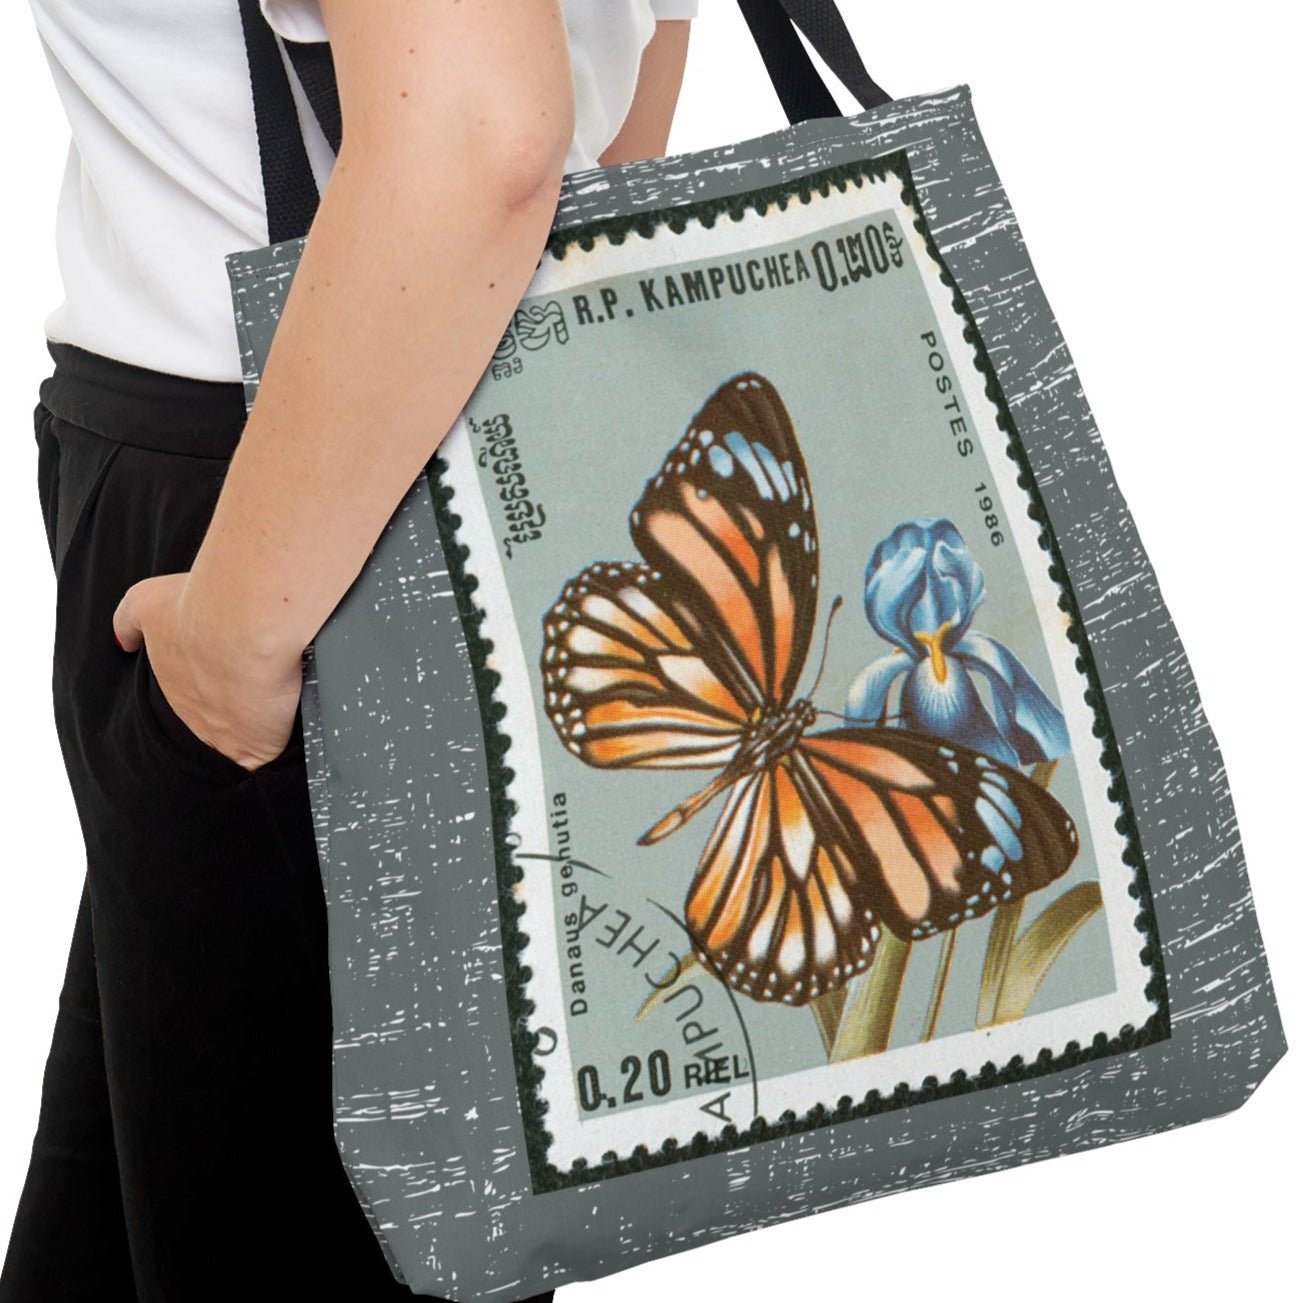 Monarch Butterfly Stamp Large Tote Bag - Graceful Insect Design on Light Charcoal Background - Eddy and Rita